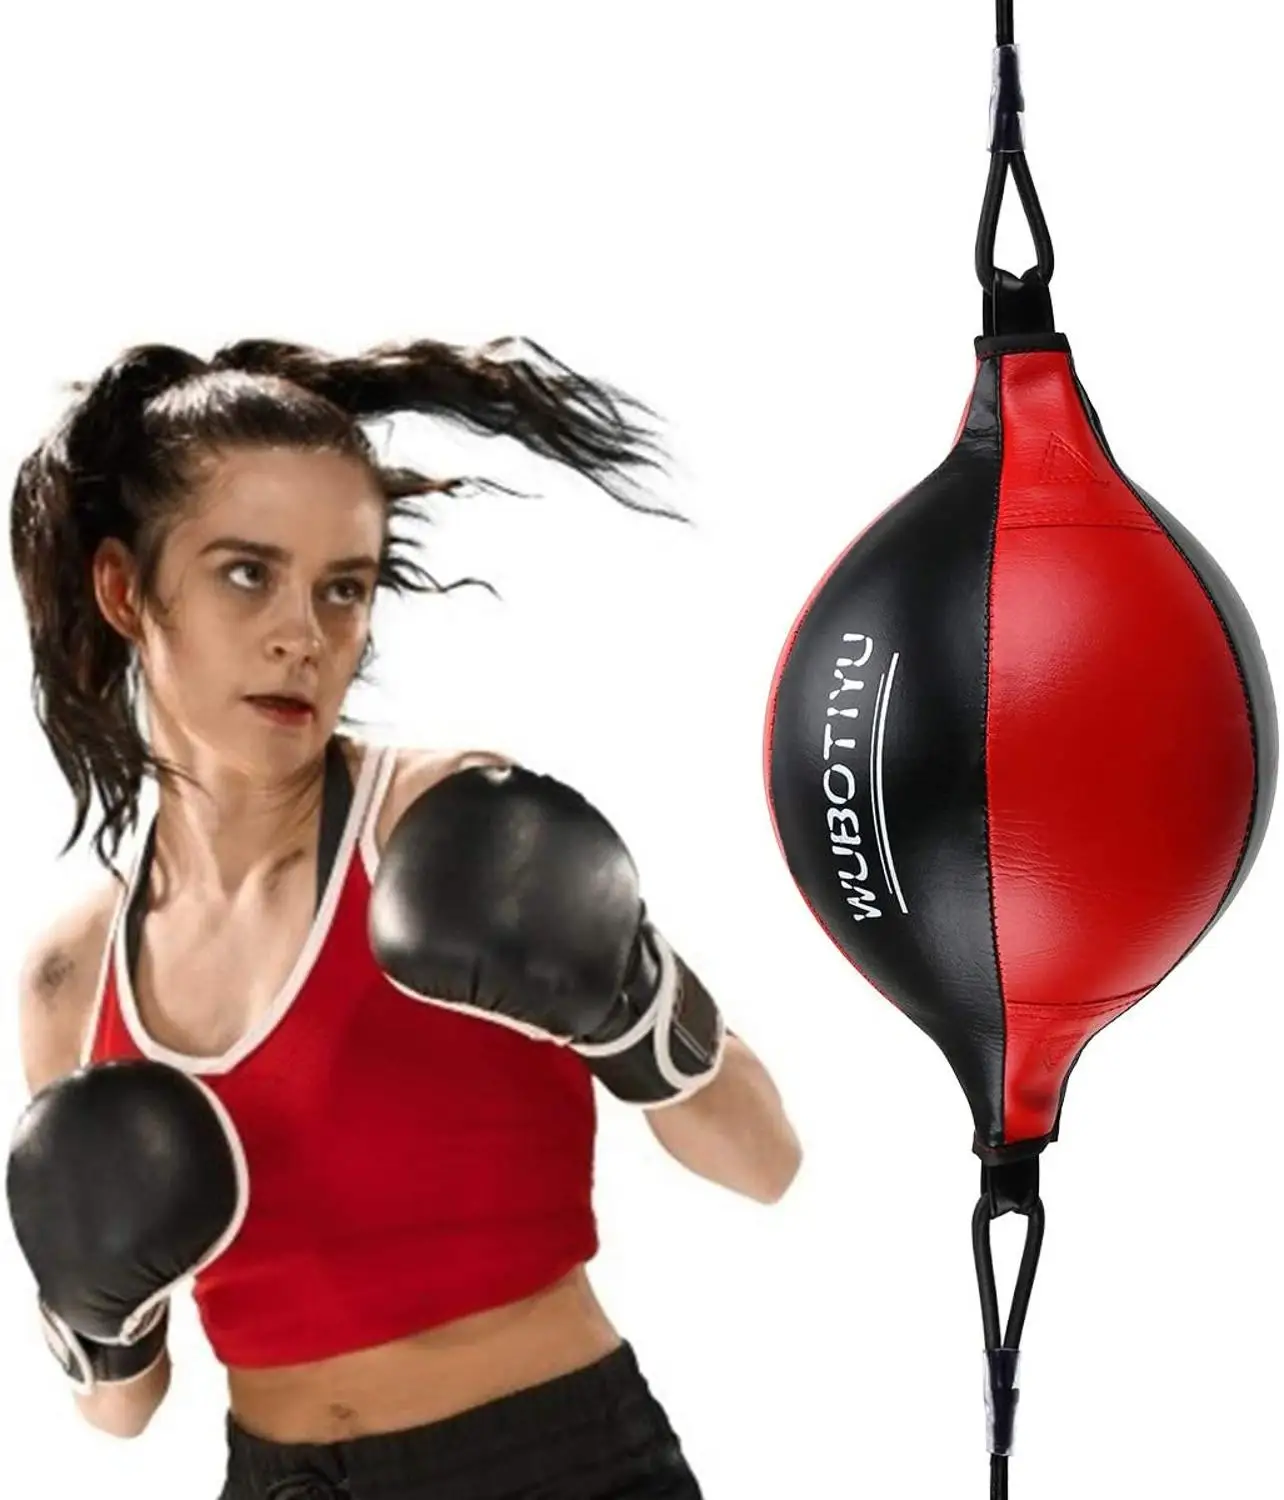 Reflex PU Leather Boxing Speed Ball Inflatable Sports Equipment Fitness Training